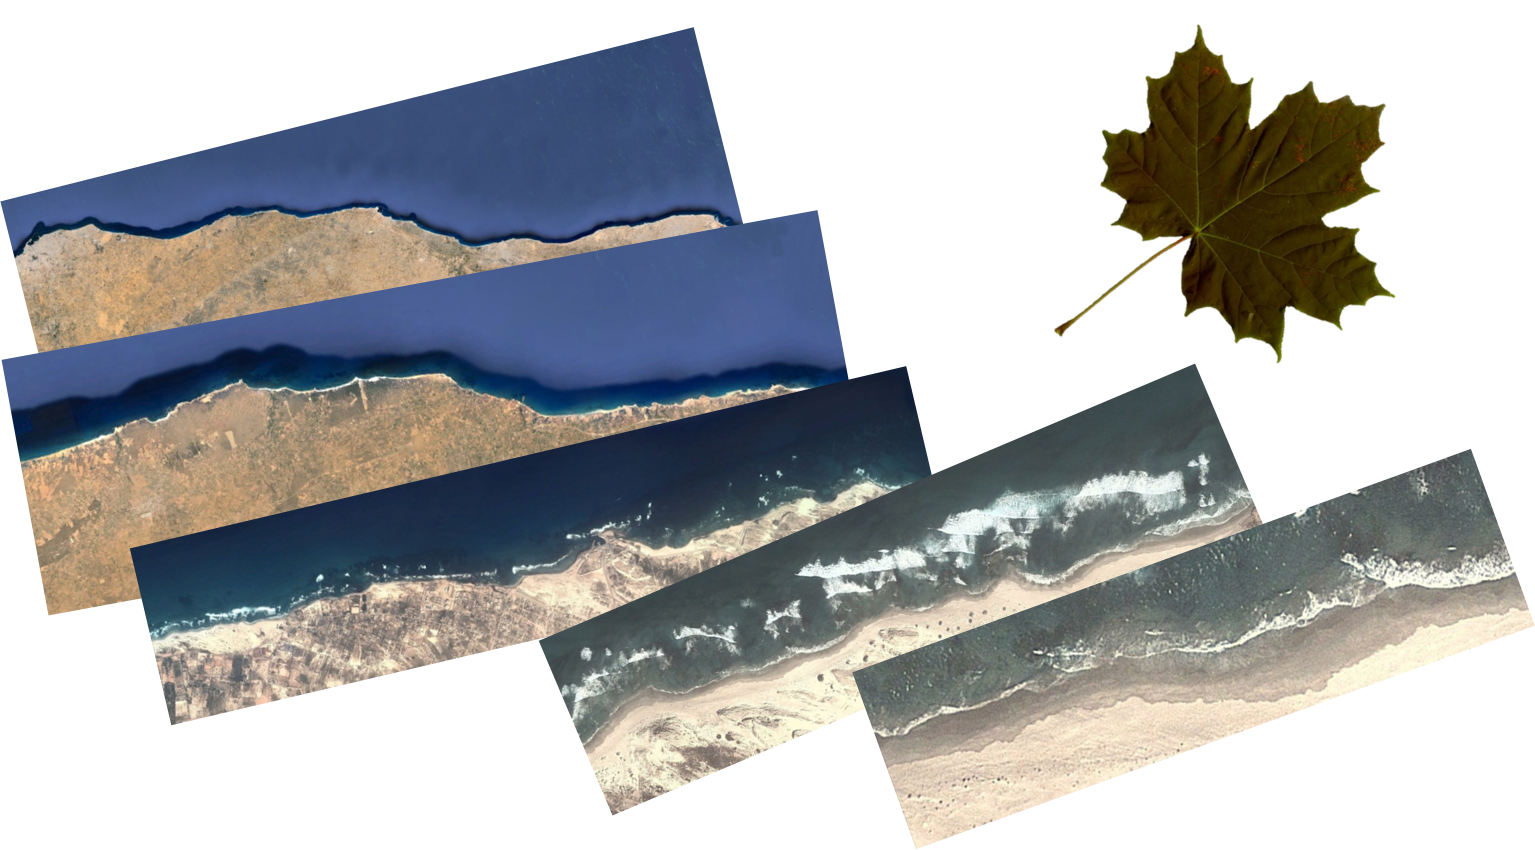 The shore of the northern African shoreline and the maple leaf are examples of self-similar structures in nature.